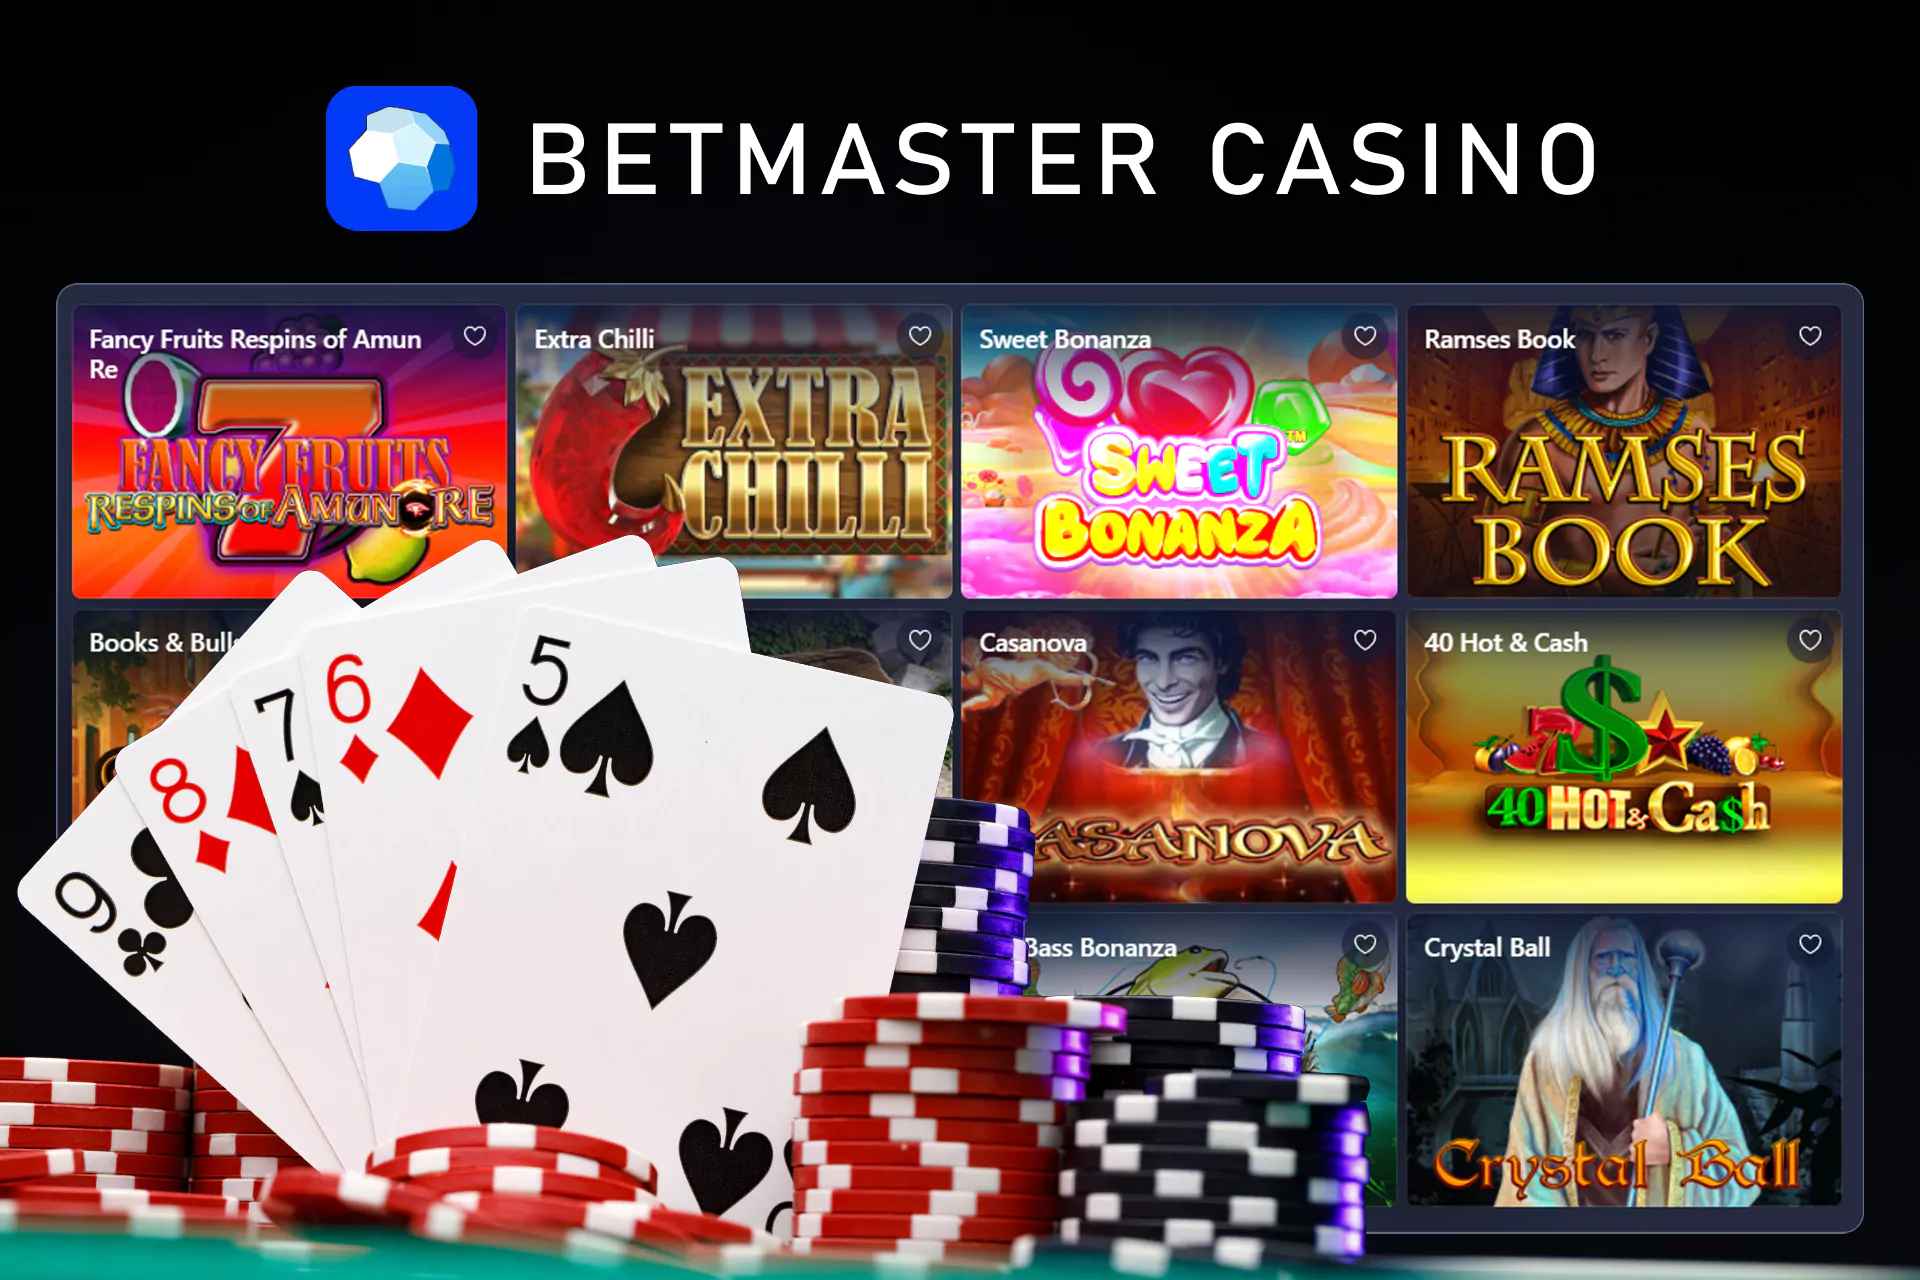 If you like to play casino games you have to visit the special section on the site or in the mobile app.